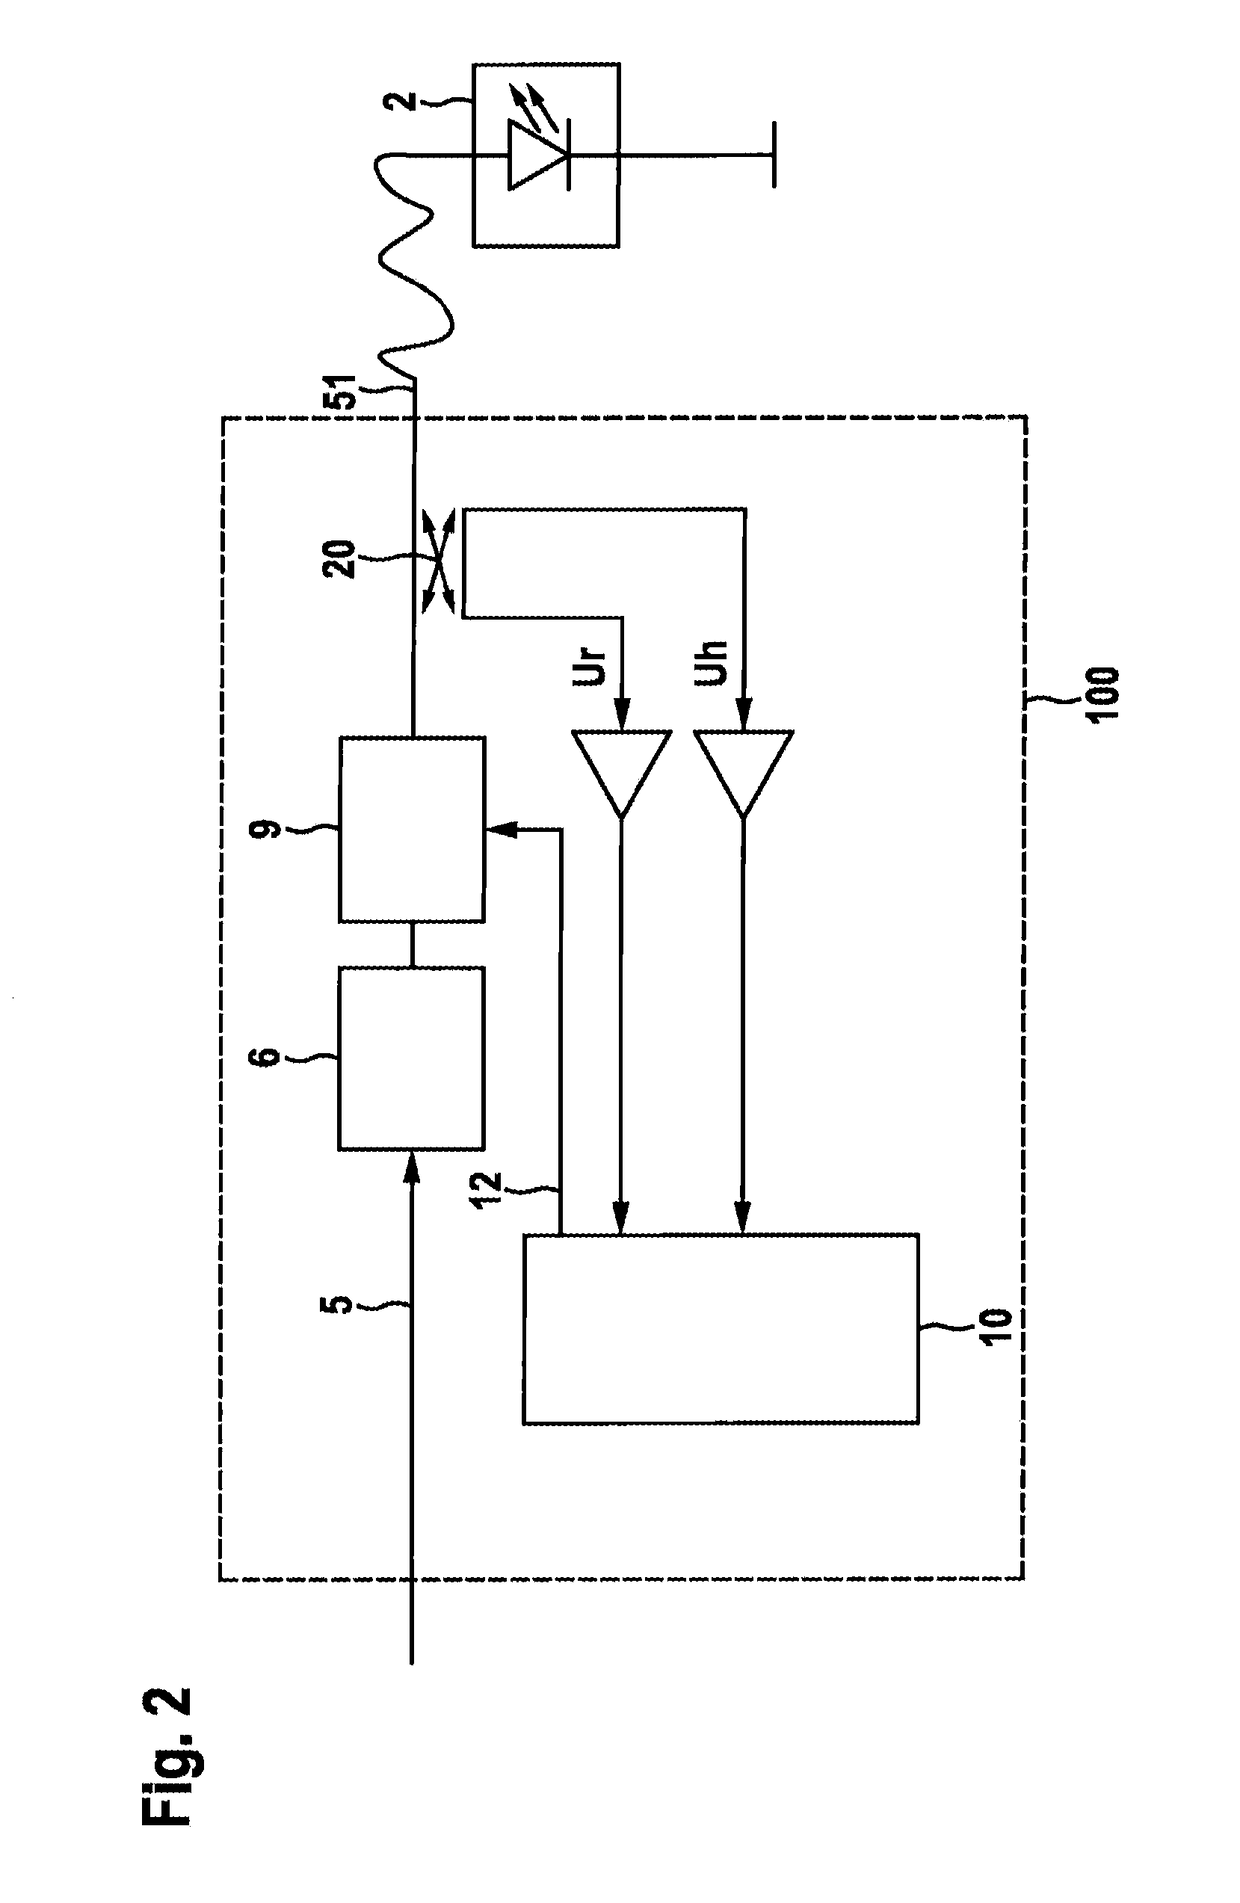 Circuit for producing a laser diode control signal